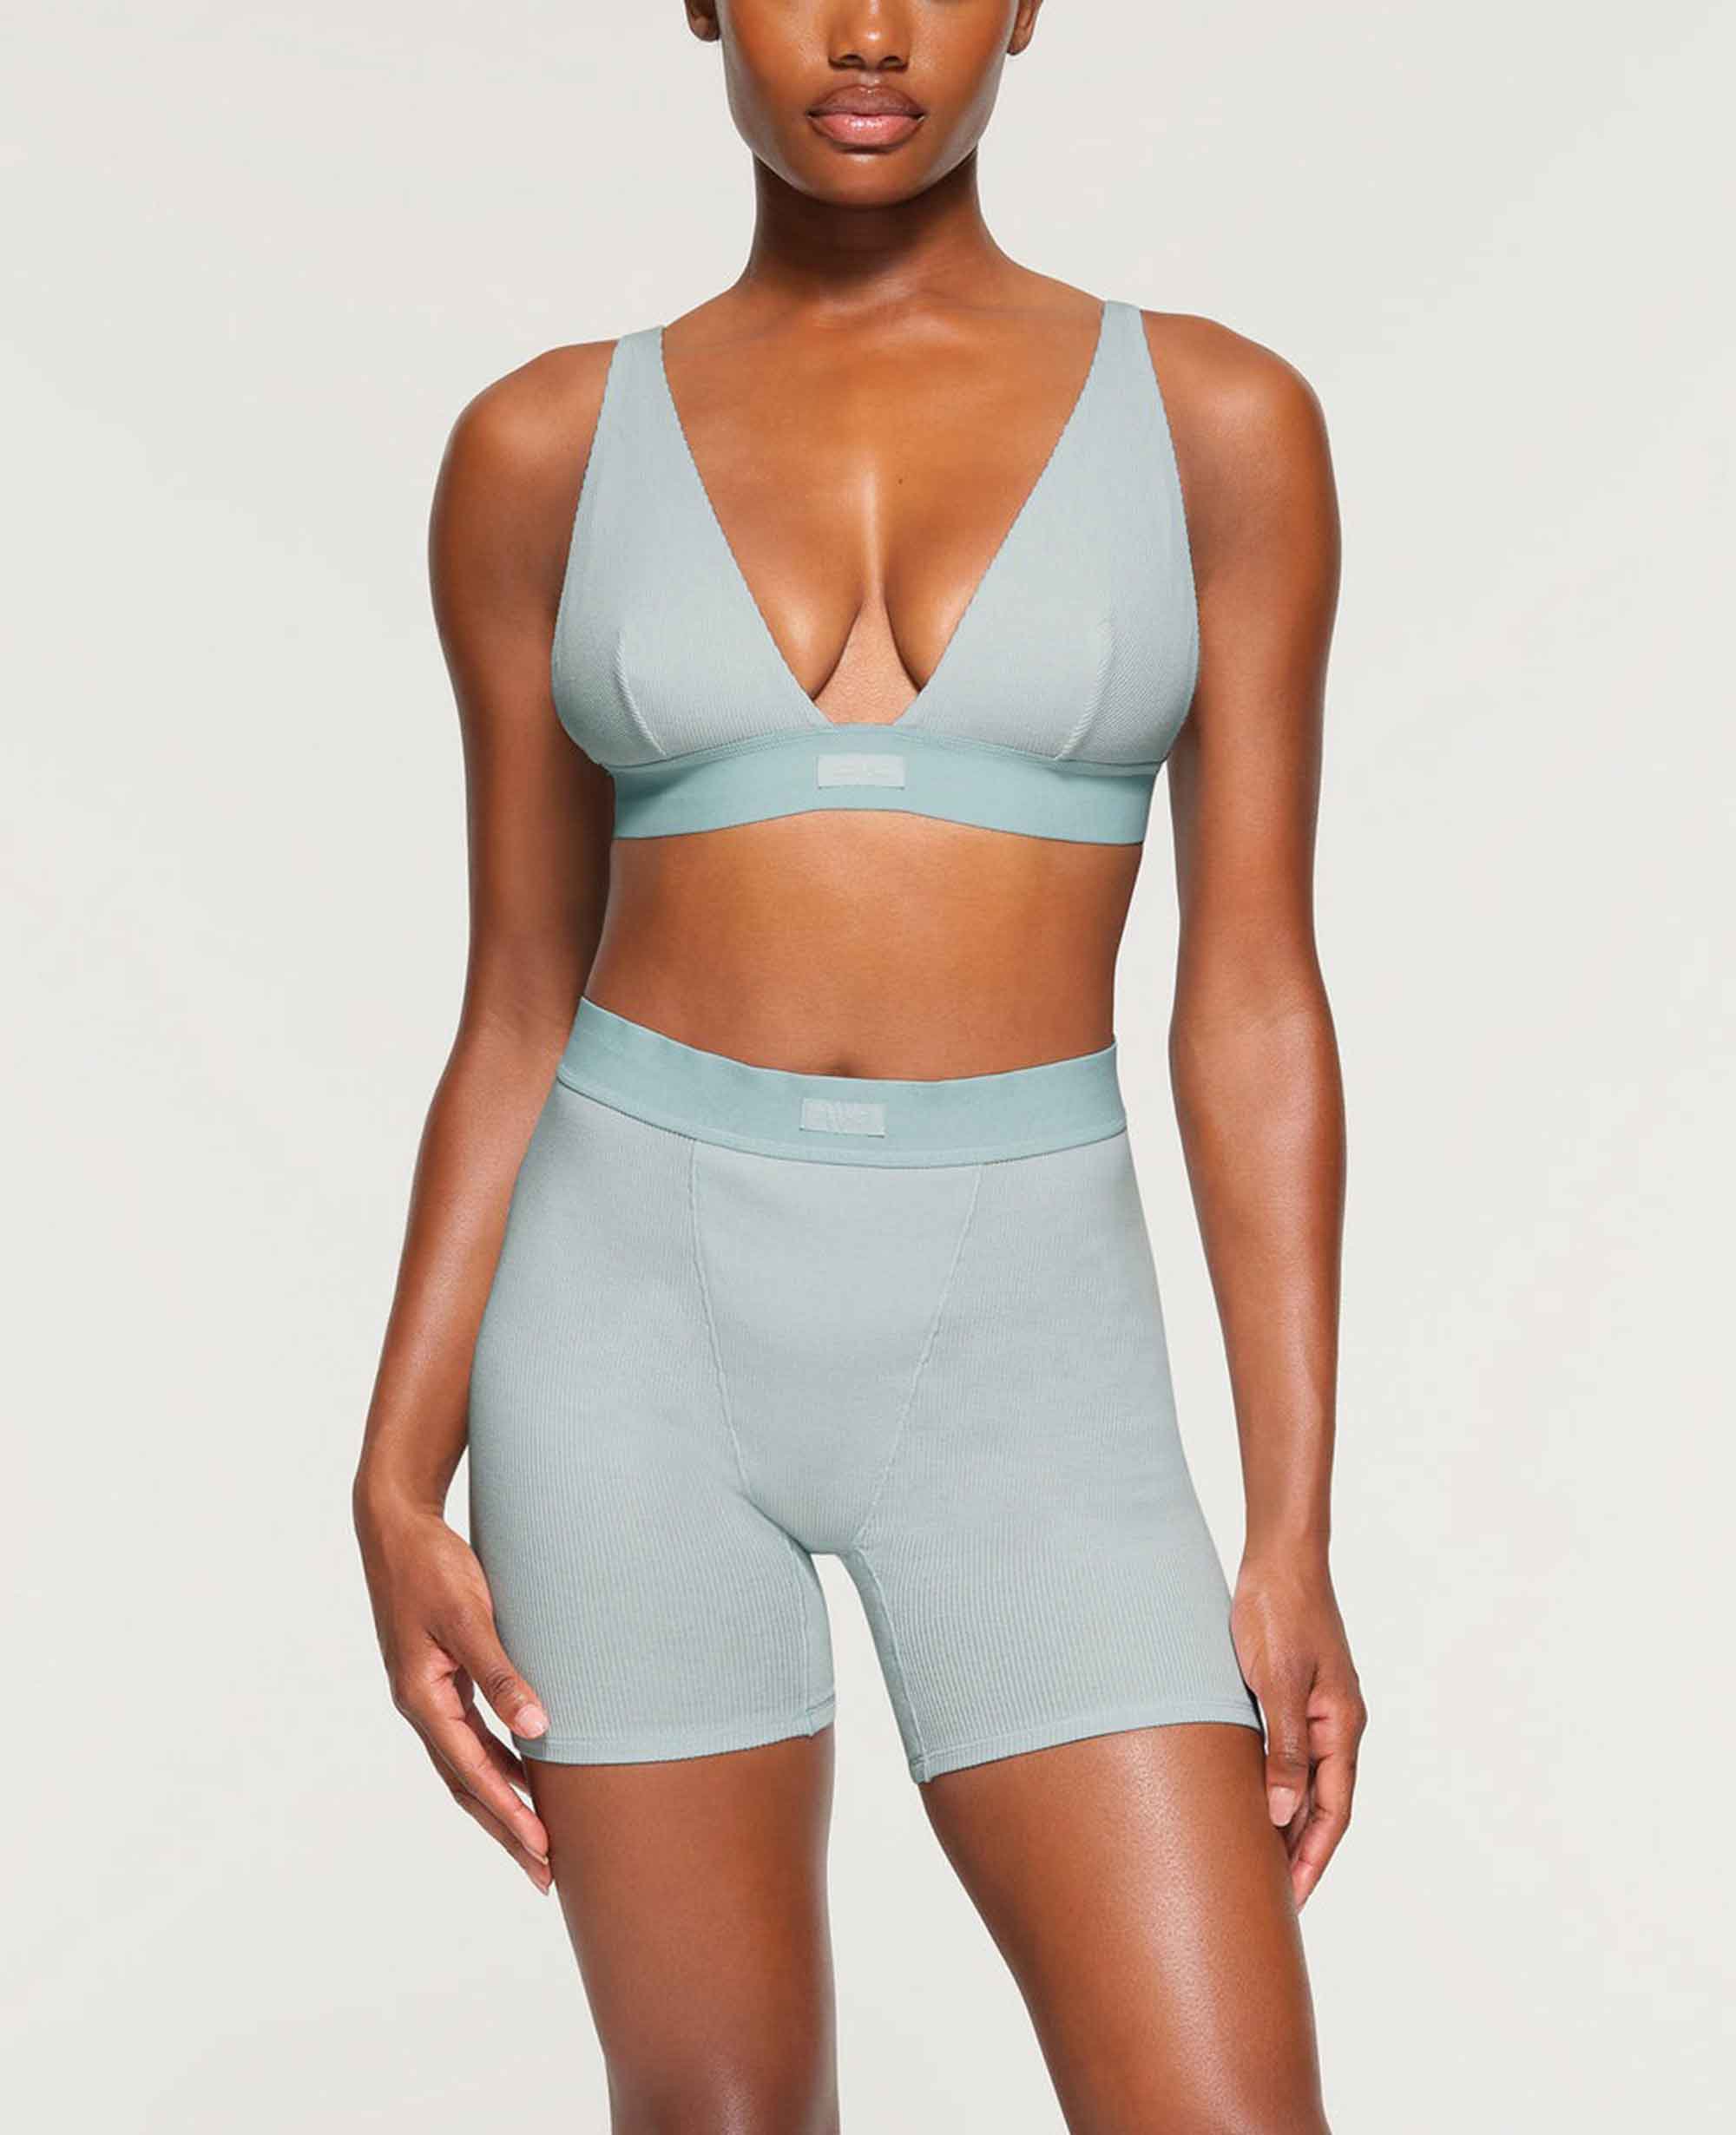 SKIMS on X: JUST DROPPED: NEW NEON FITS EVERYBODY. You asked, and we  delivered. We just added 4 new styles to our best-selling Neon Fits  Everybody collection: the Skimpy Scoop Bralette, Strappy